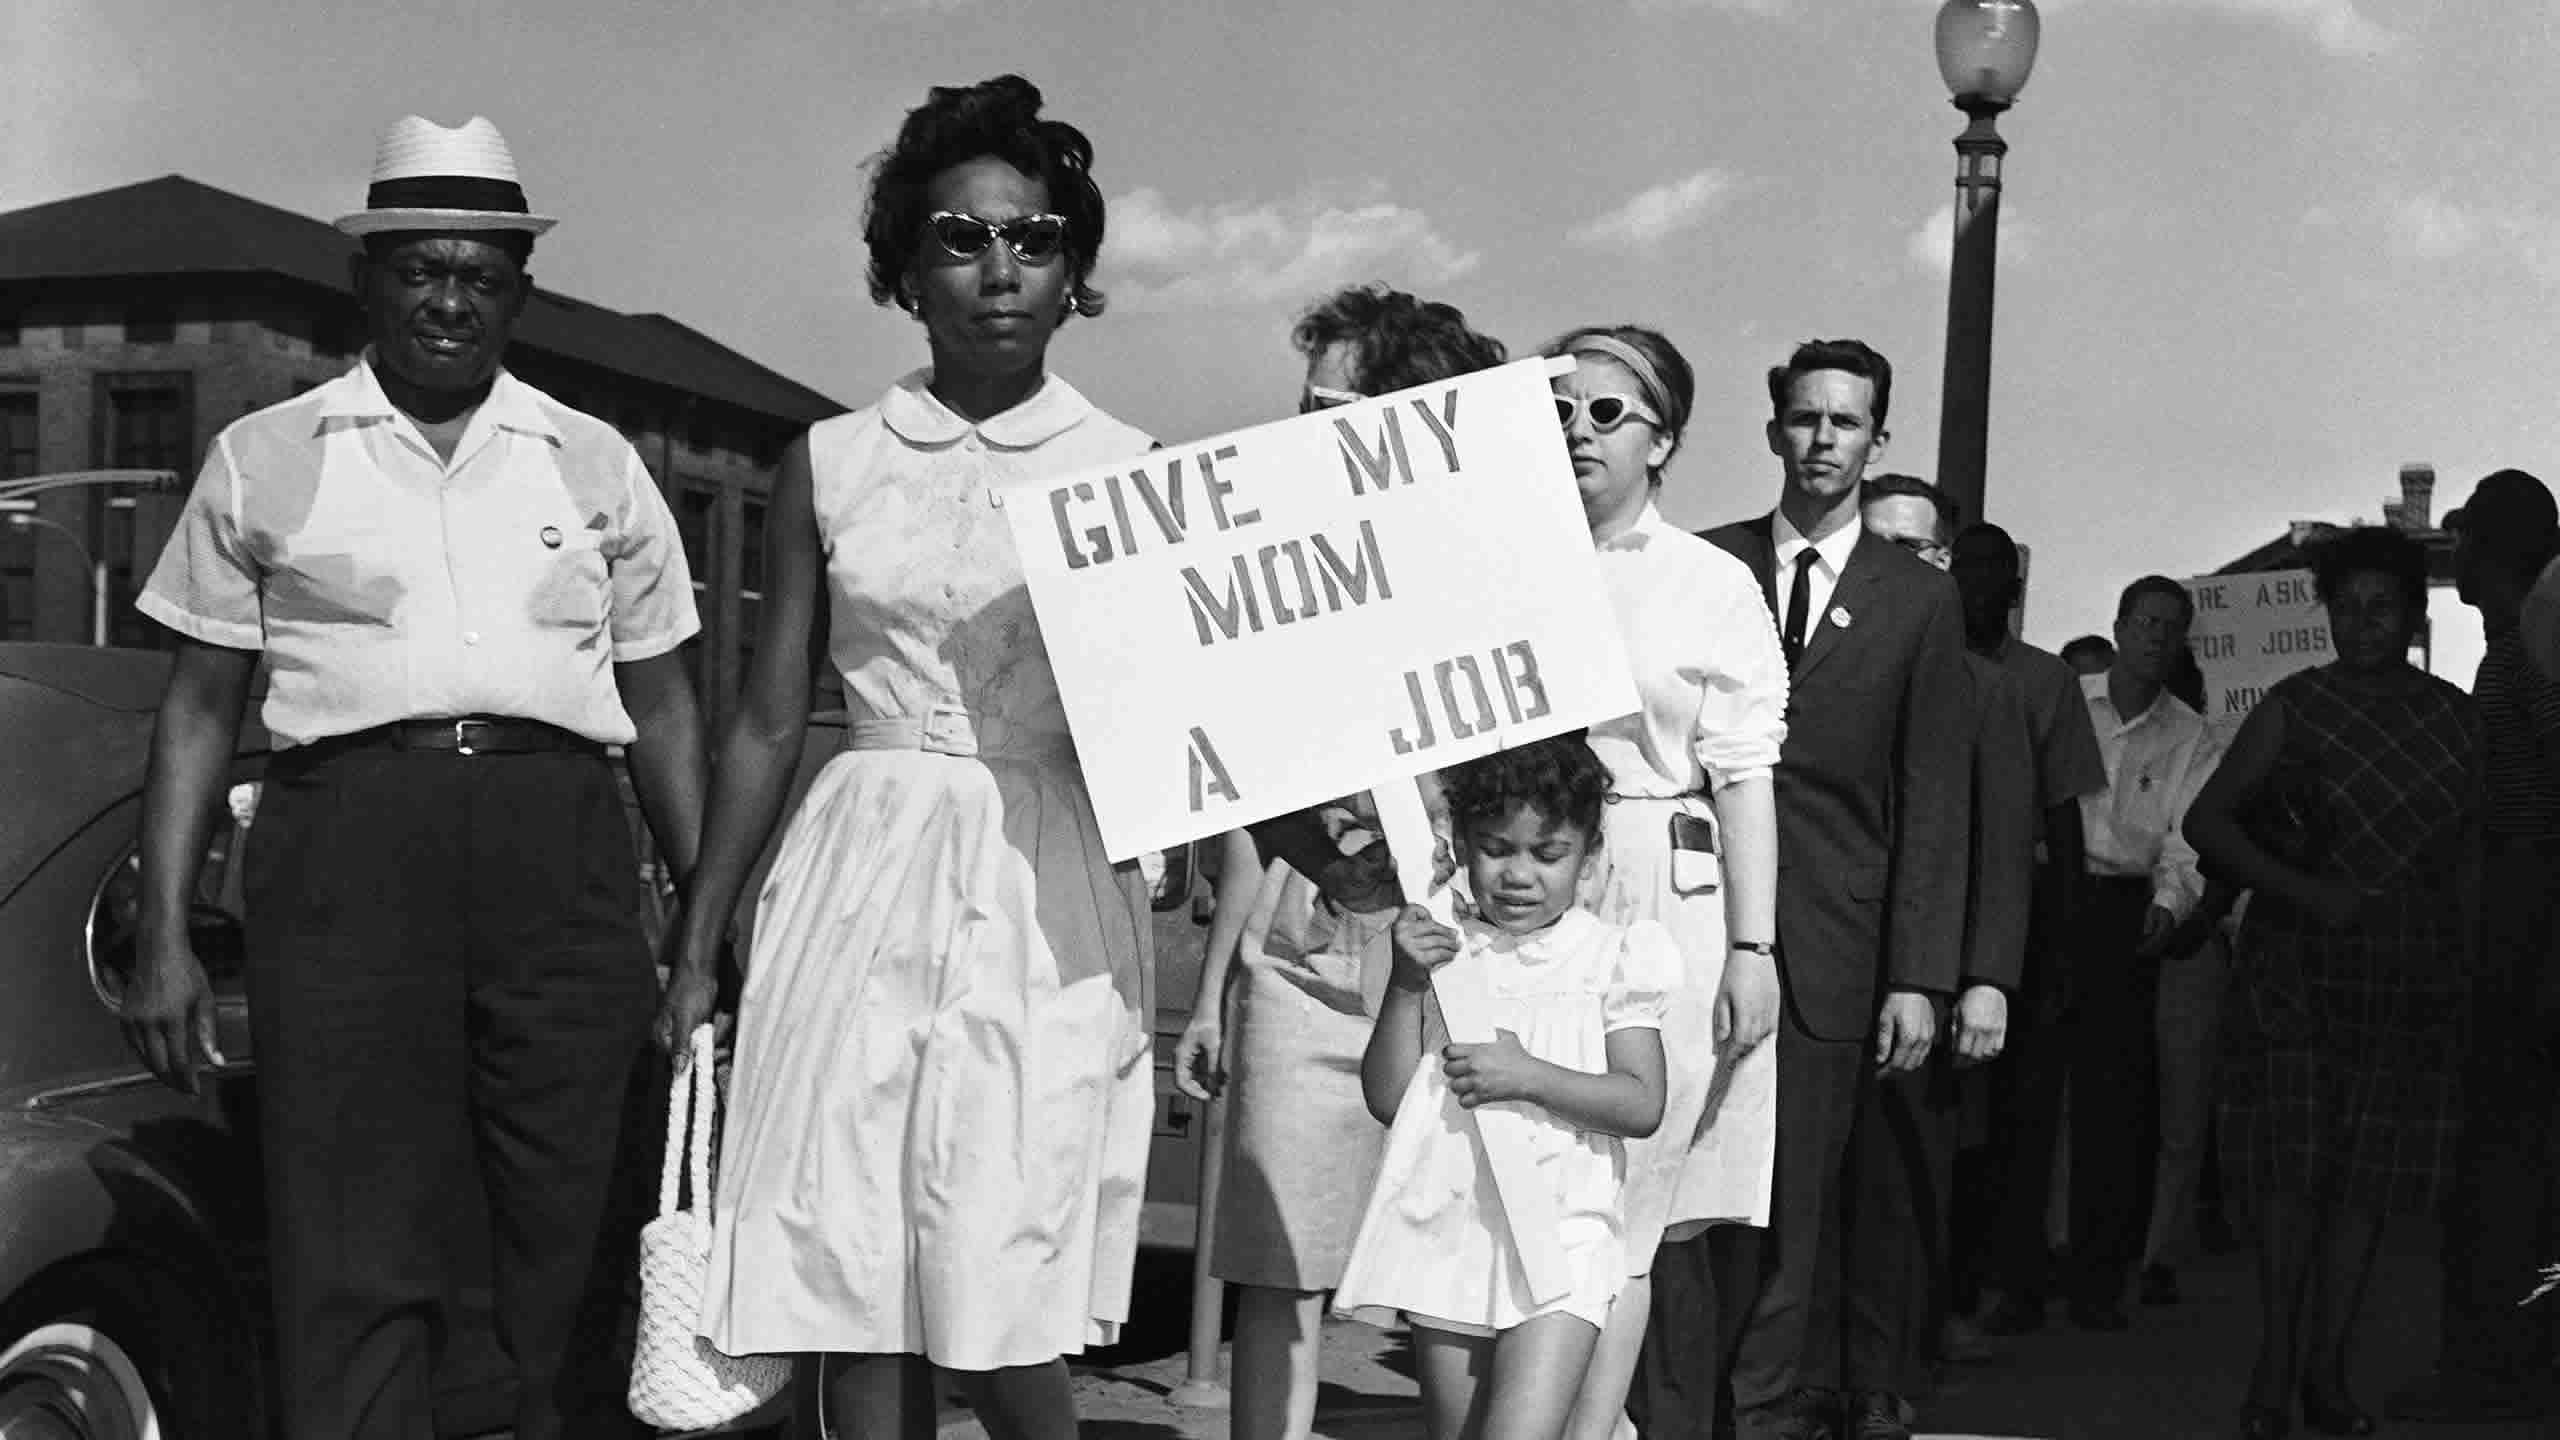 The Civil Rights Act of 1964: An End to Racial Segregation